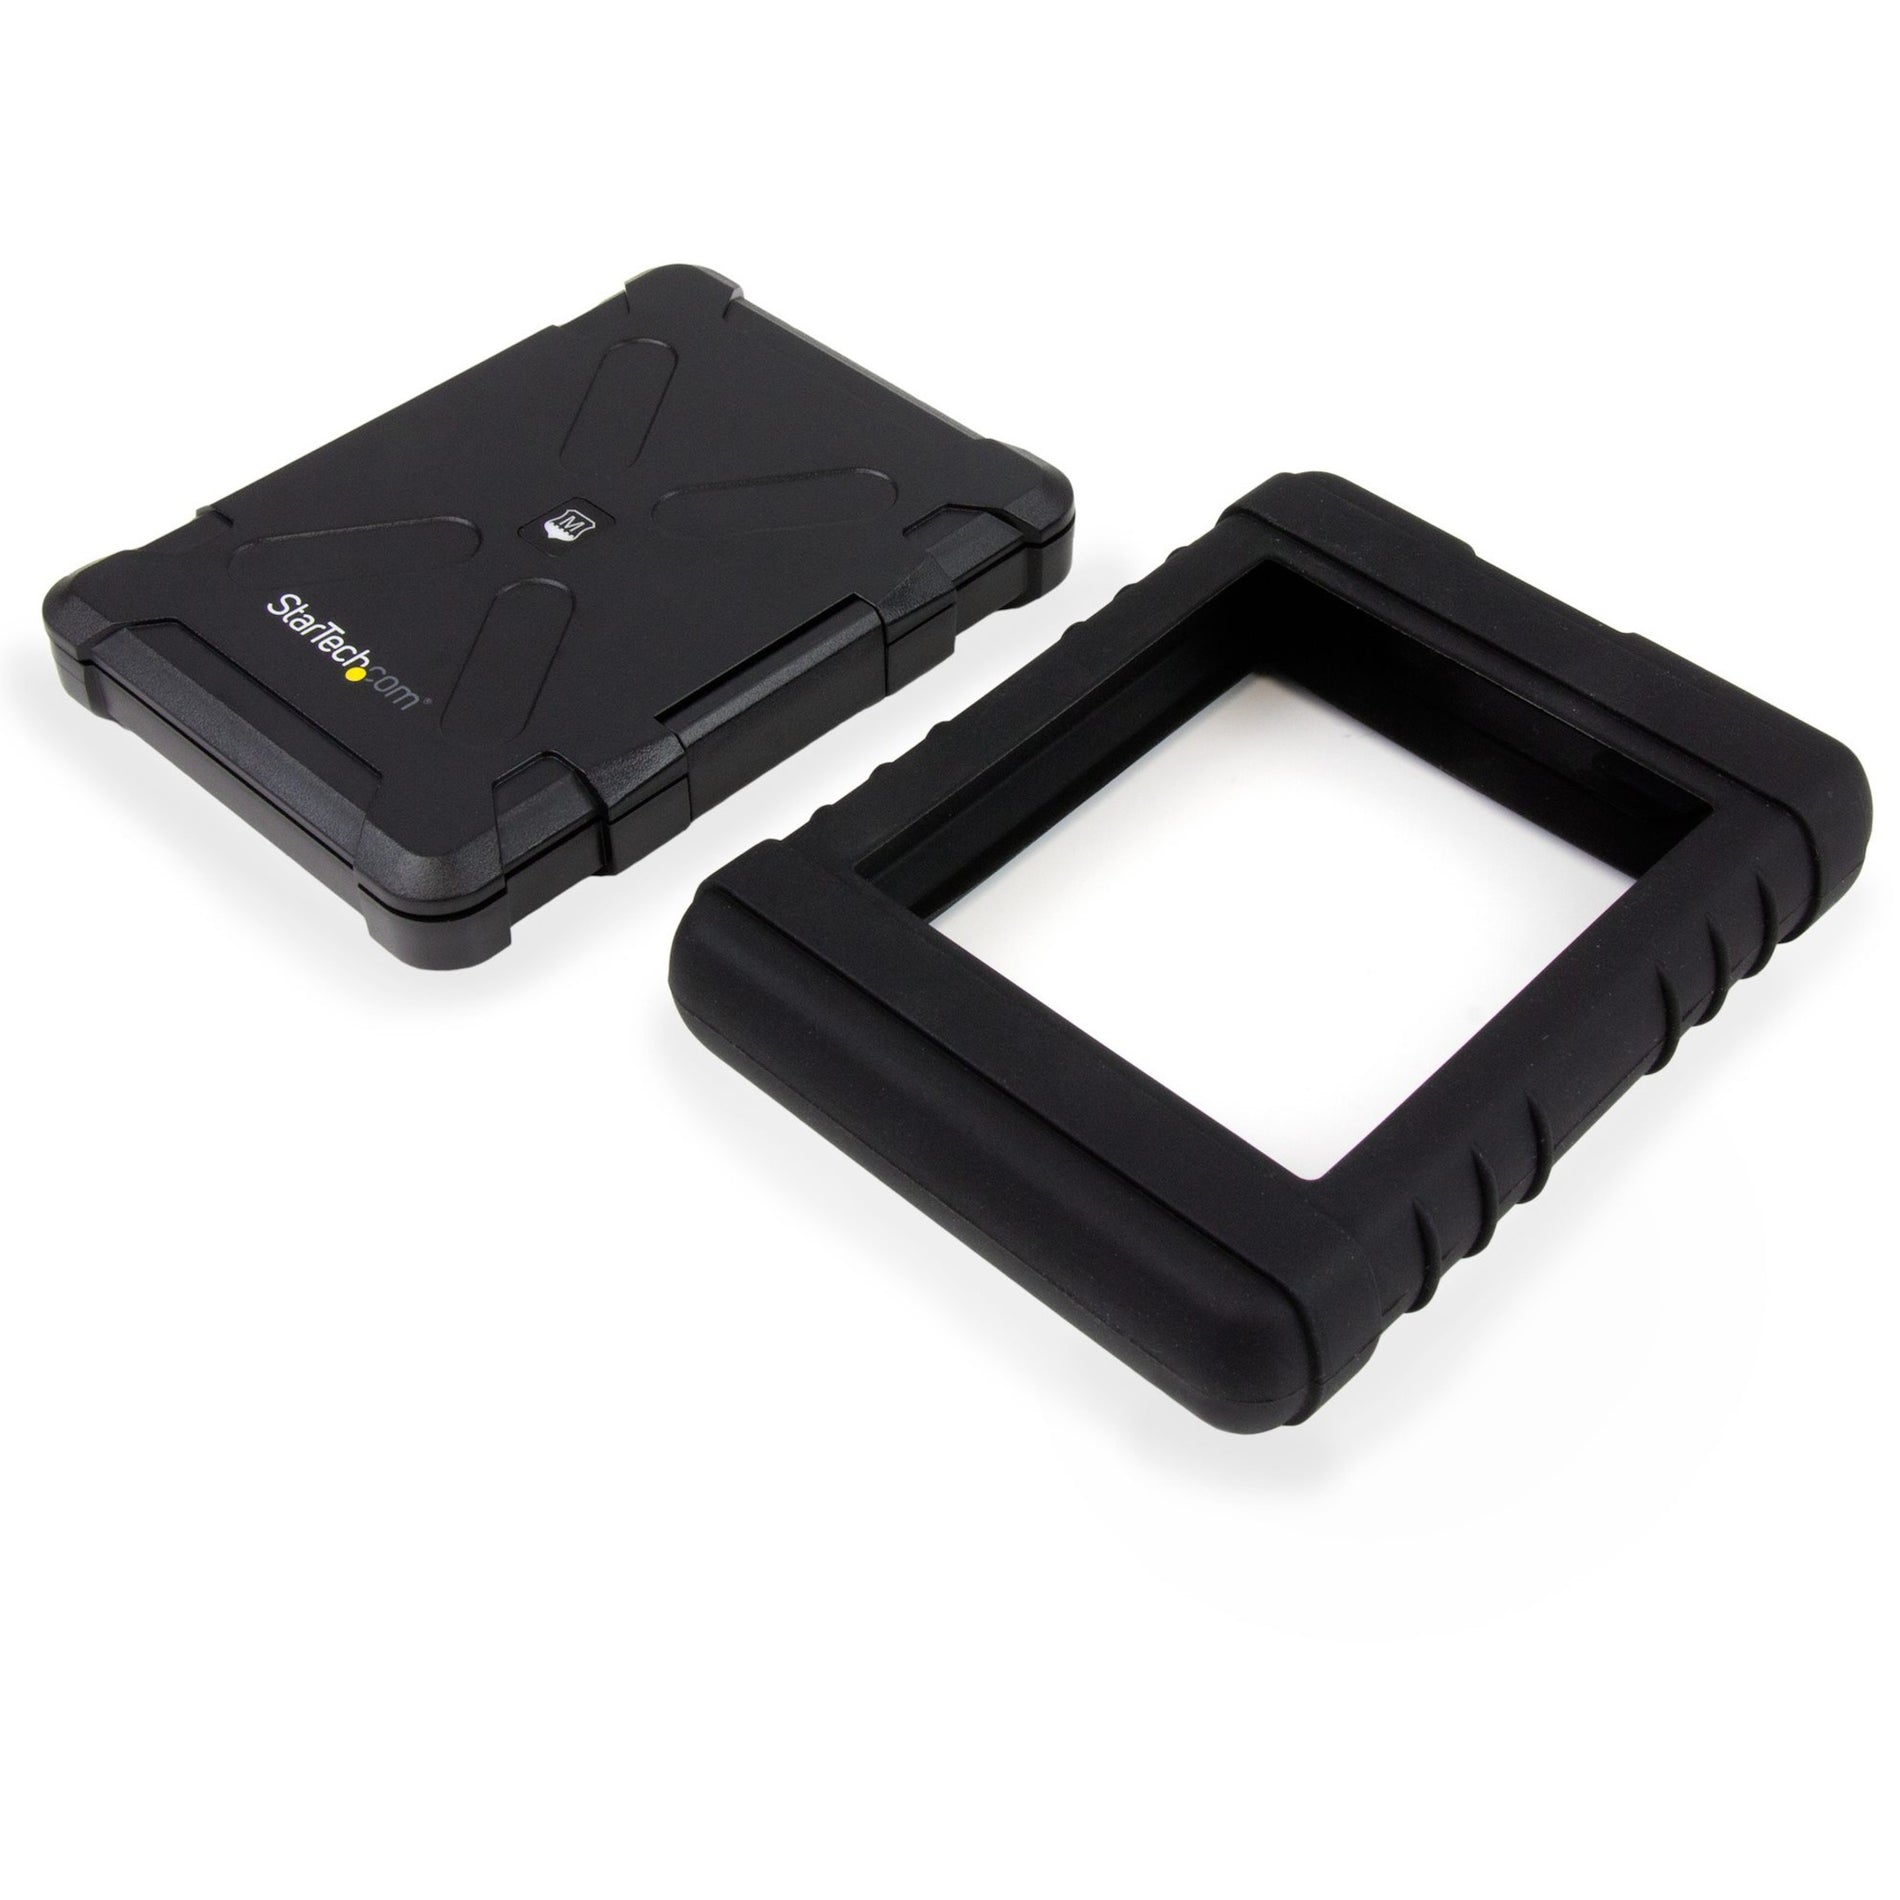 StarTech.com S251BRU33 Rugged Hard Drive Enclosure - USB 3.0 to 2.5in SATA 6Gbps HDD or SSD - UASP, Durable and Fast External Storage Solution